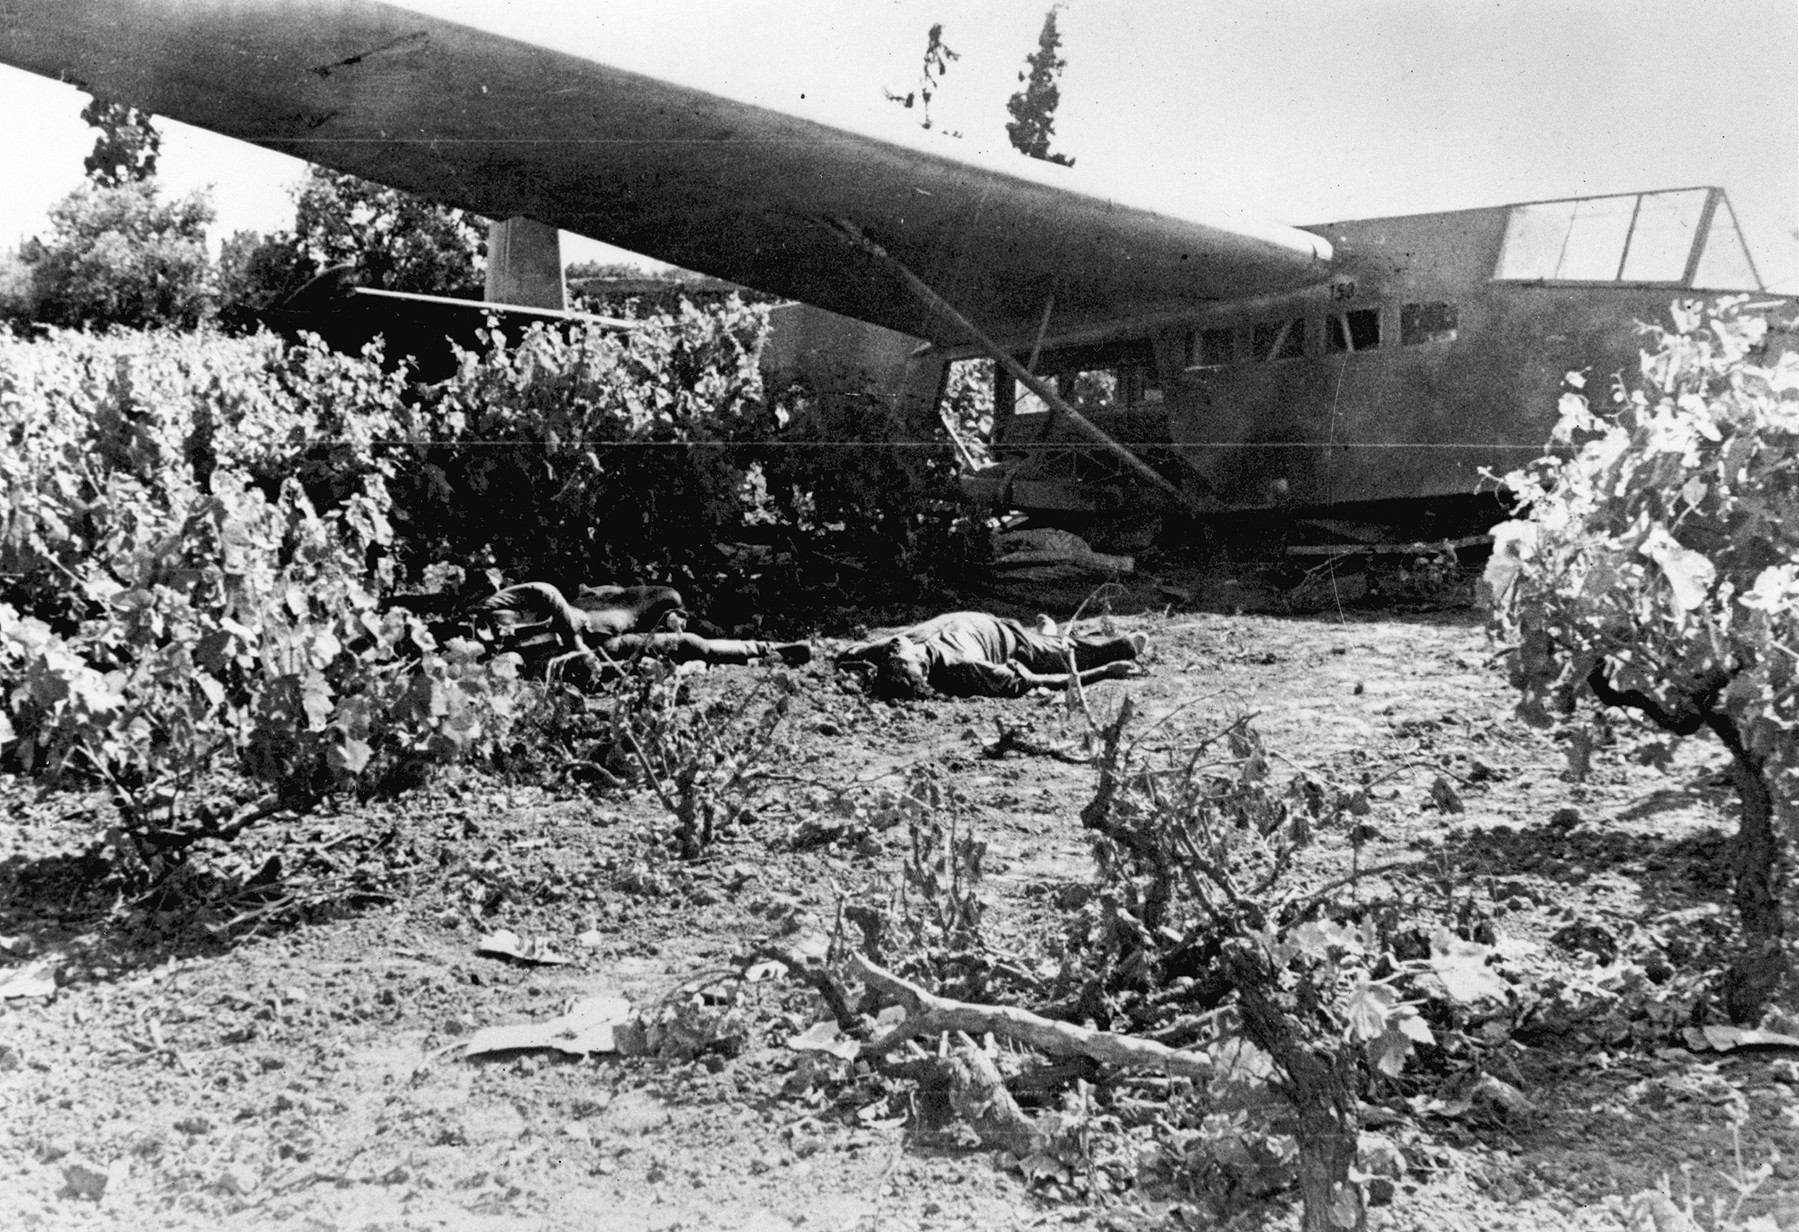 Dead German assault troops lie beside the wreckage of their glider. Many were killed before they could even exit the aircraft.